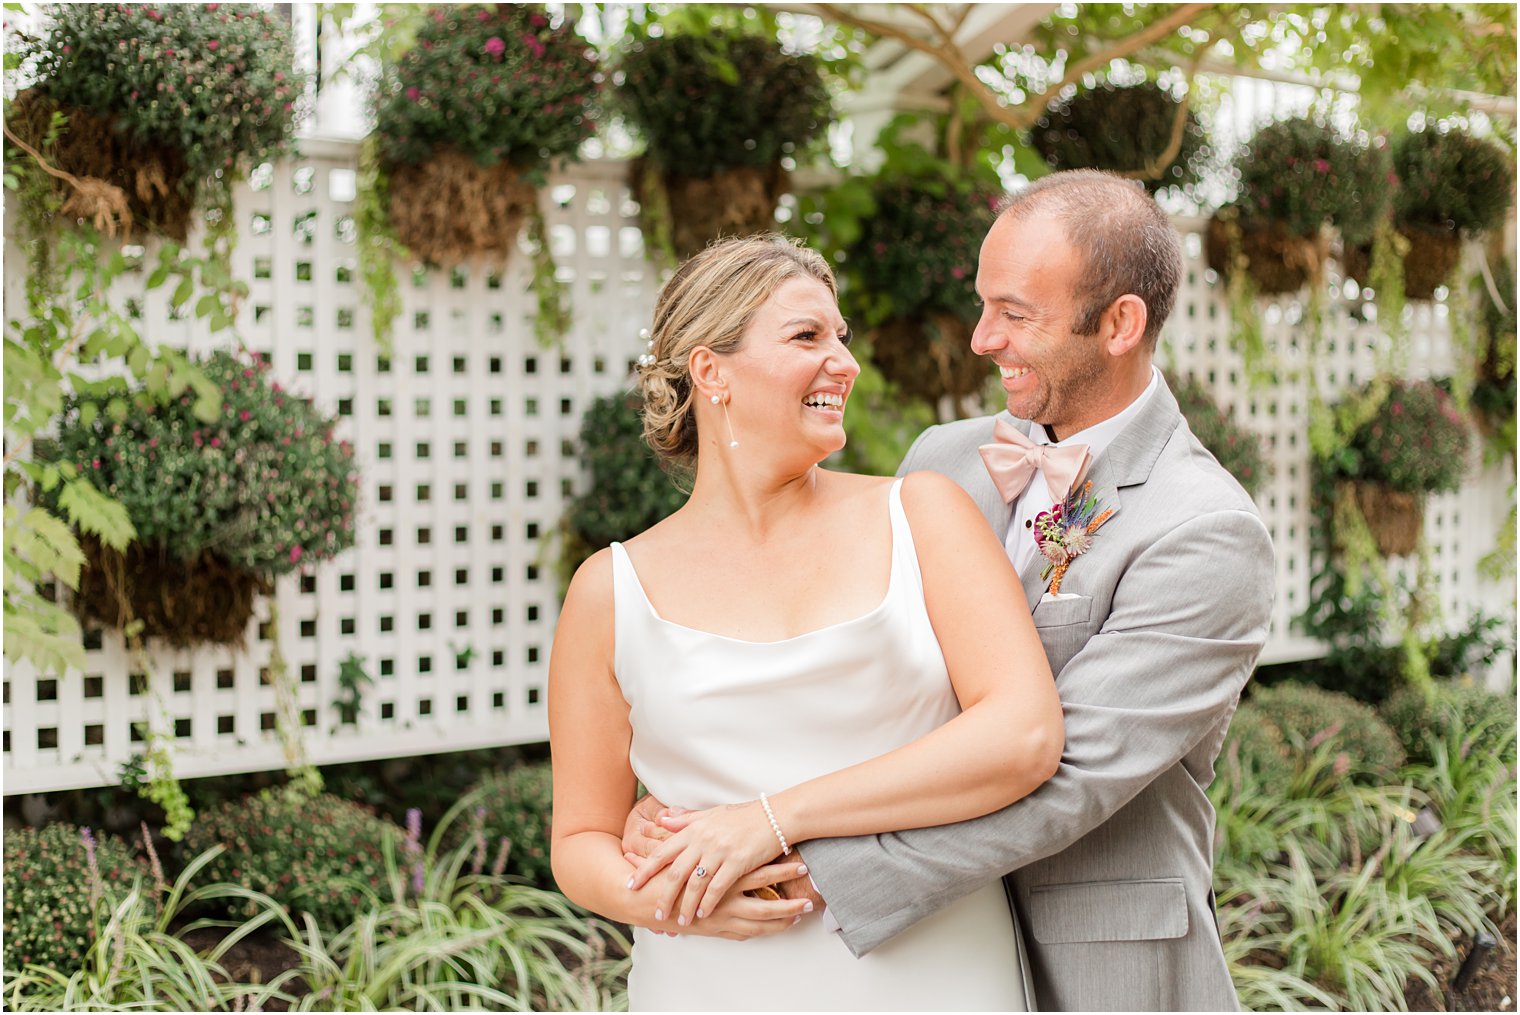 bride and groom smile together by planted plants at Bonnet Island Estate